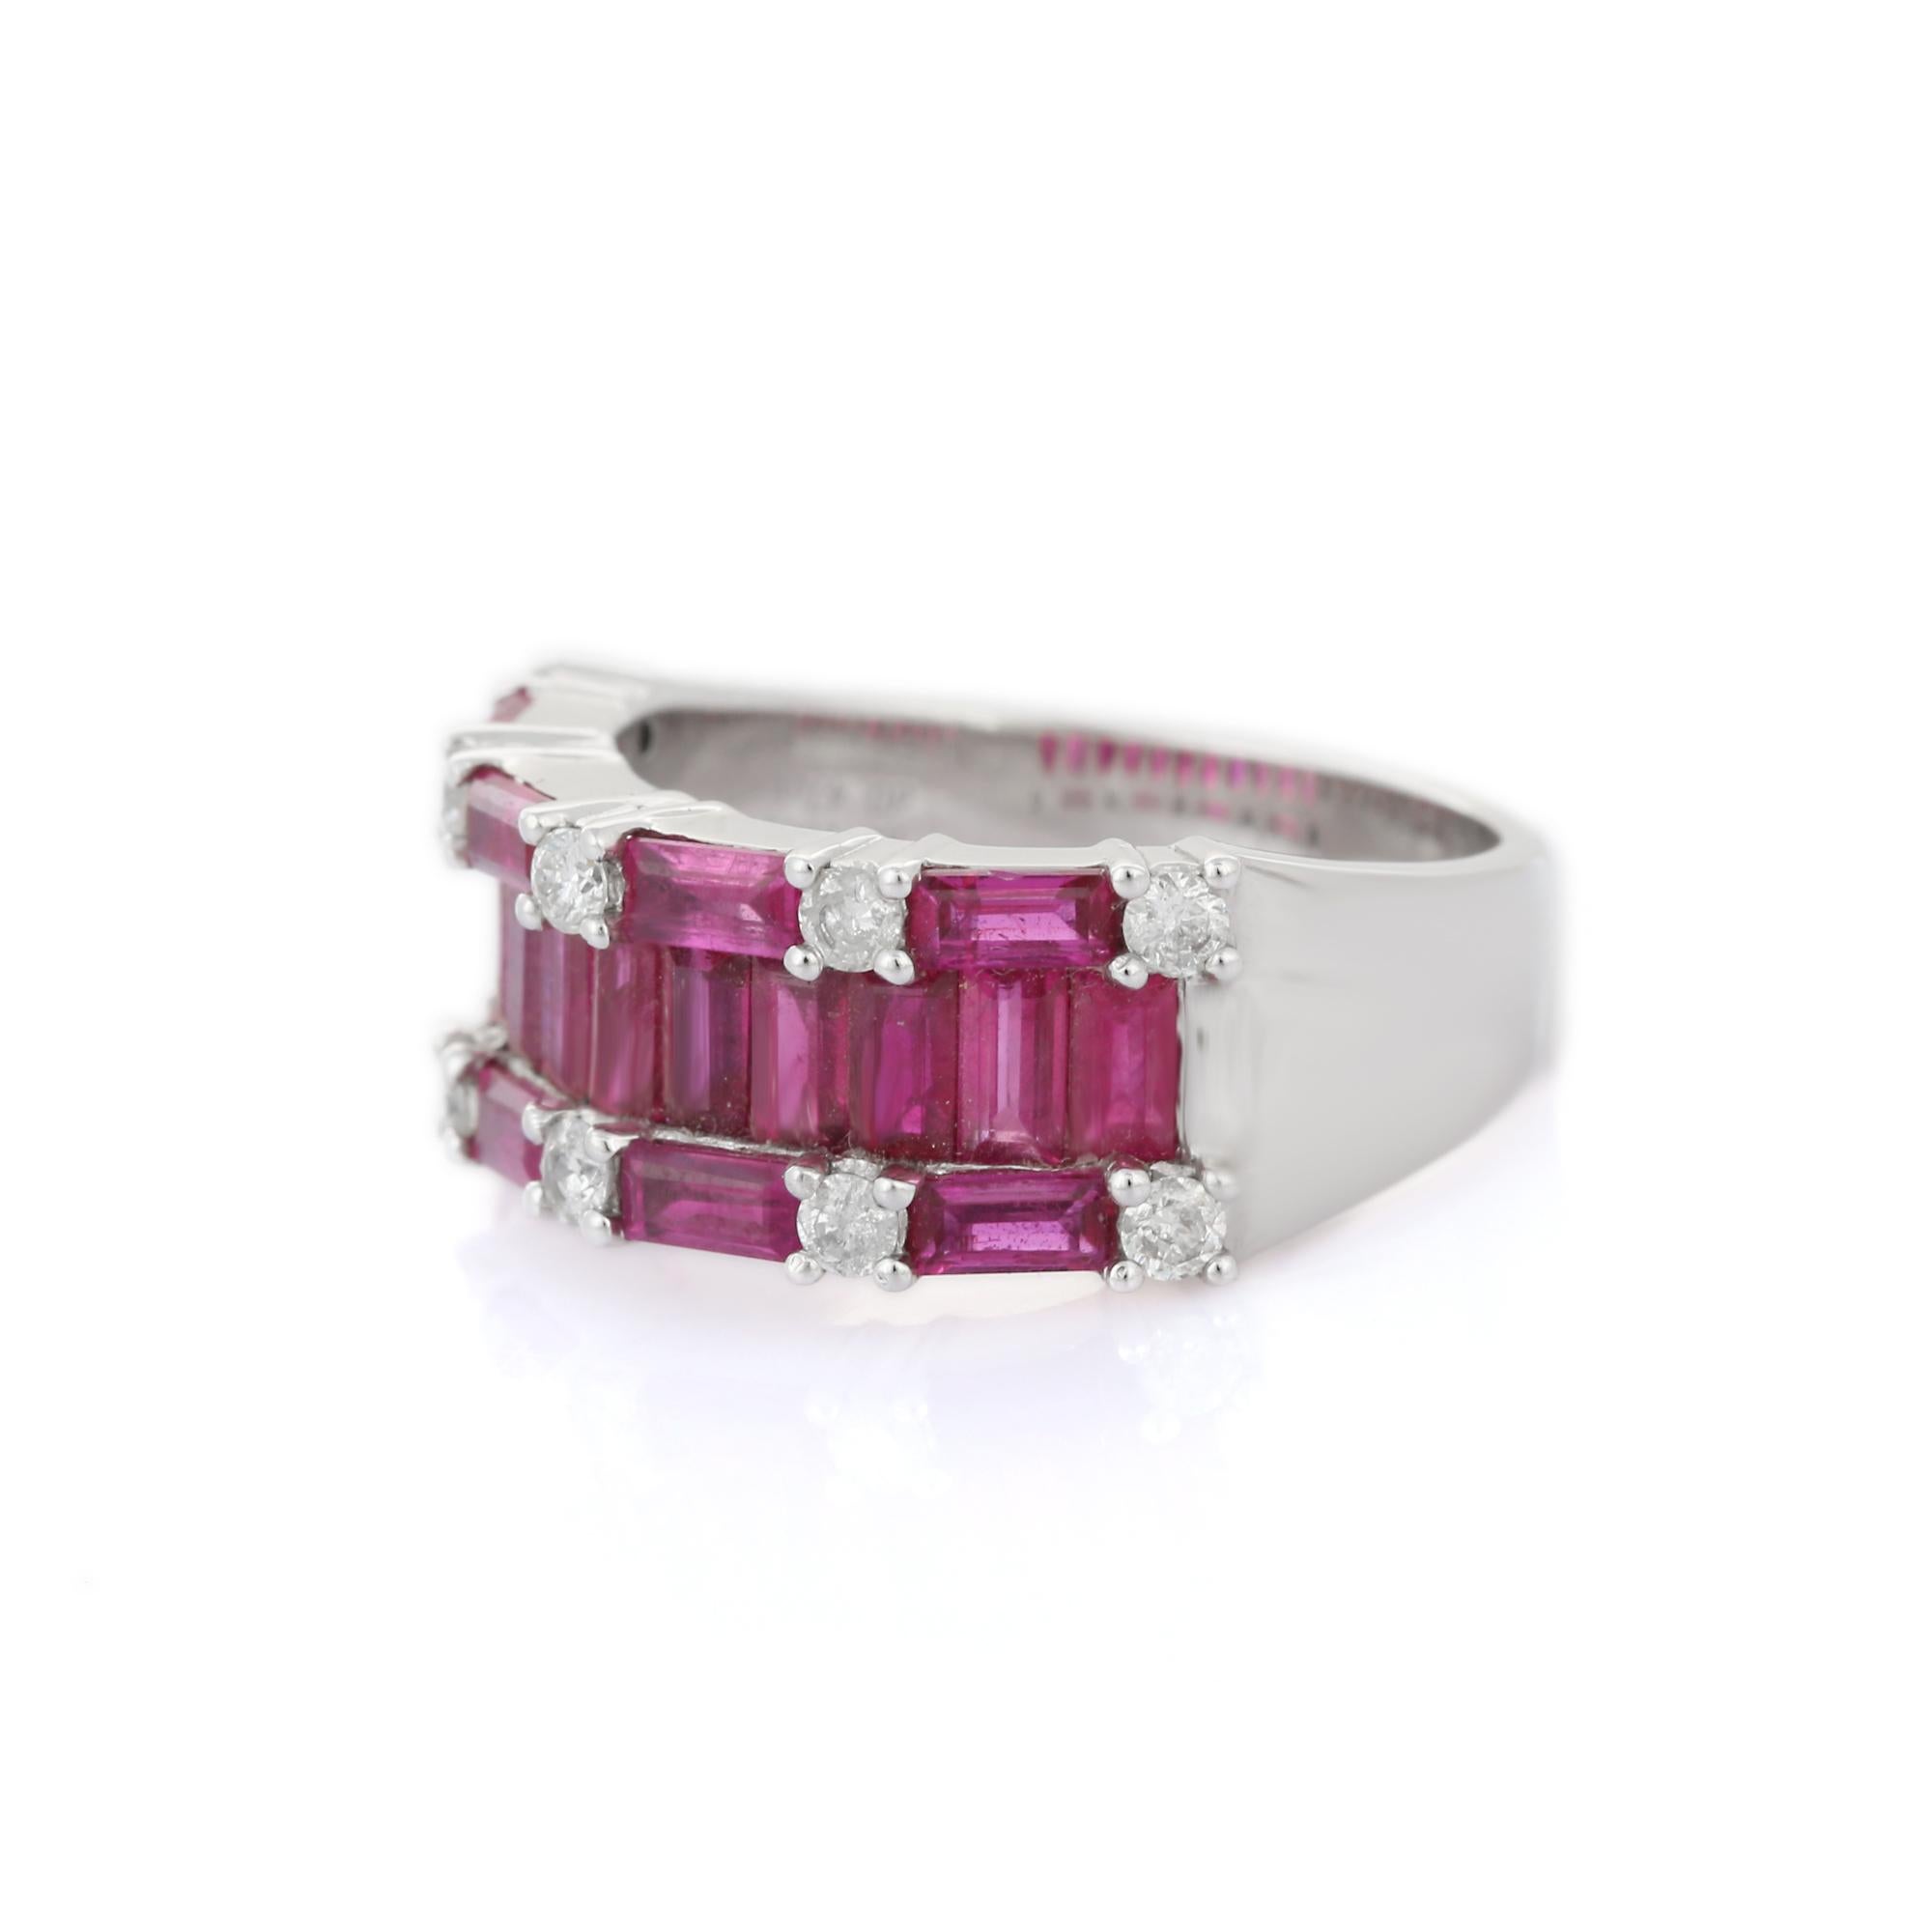 For Sale:  14K White Gold 3.19 Ct Ruby Baguettes Cluster Wedding Band Ring with Diamond 4